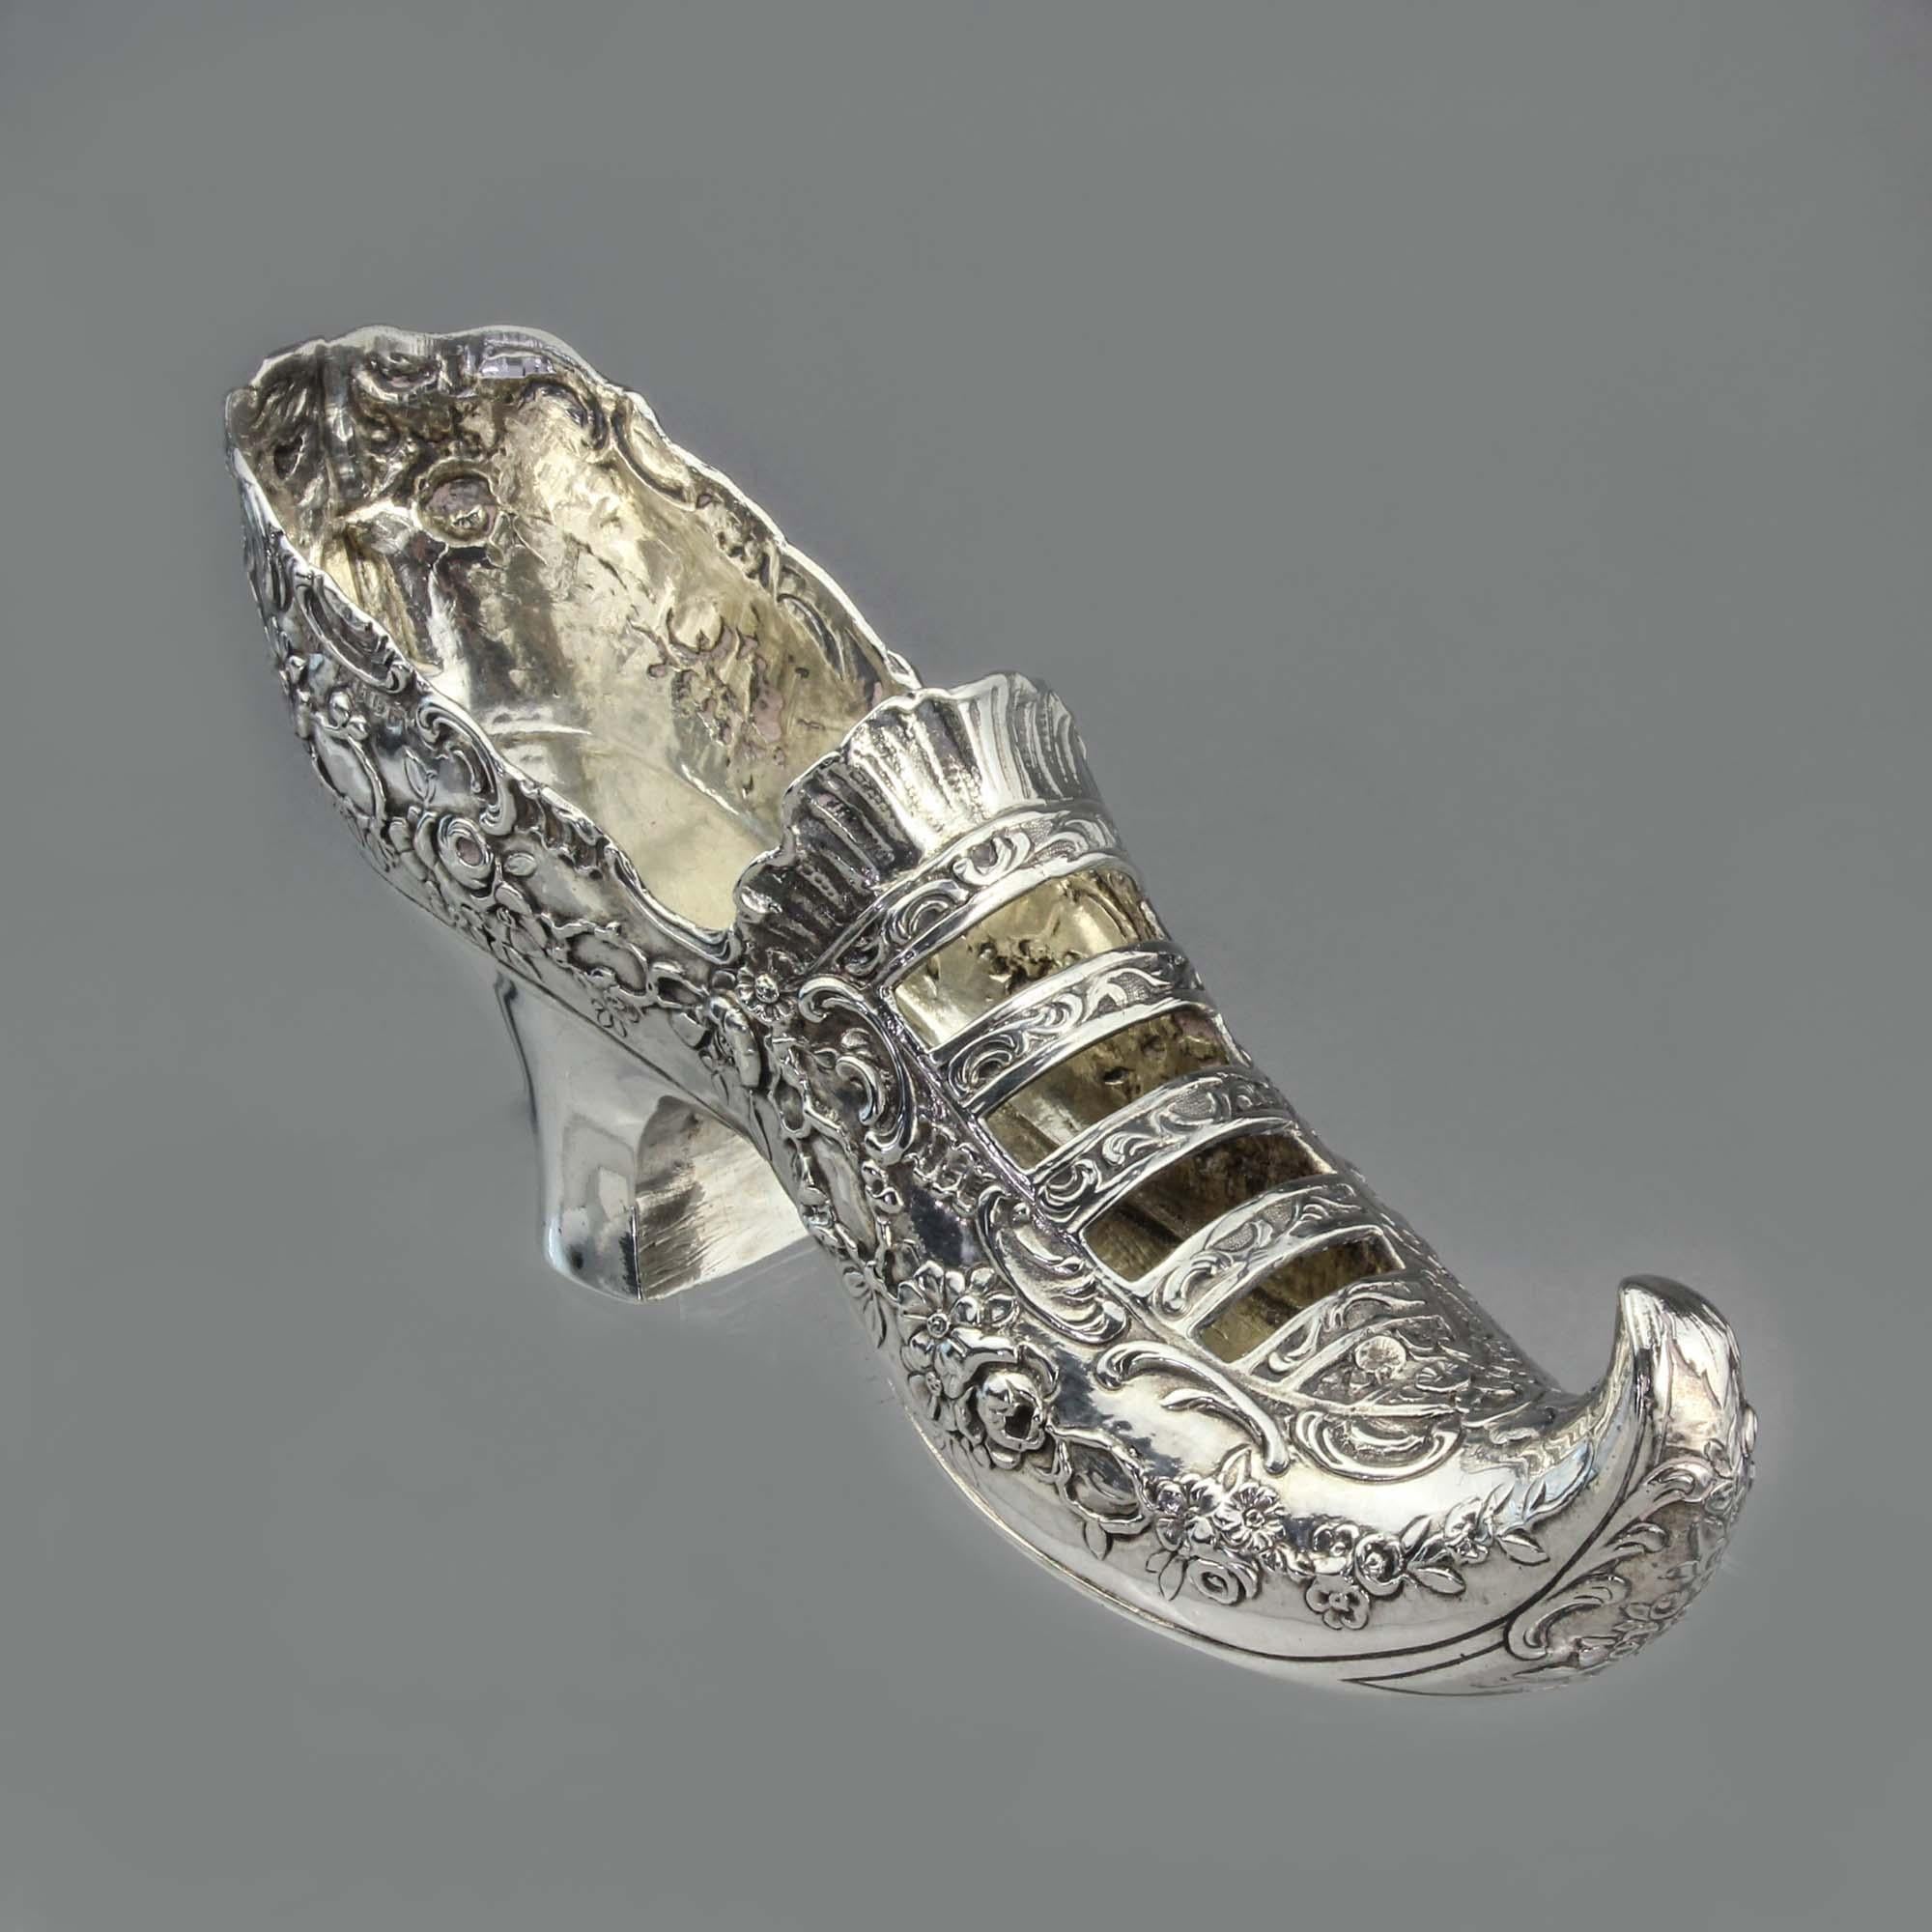 Antique German 930. silver Rococo Lady's shoe with elf toe 

Shoe is with chased scrolls, floral garlands and open bands.

Made in Germany.
Maker: Gebruder Neumann 
Imported to England, London, 1896 by William Moering.

Dimensions:
15.5 x 4